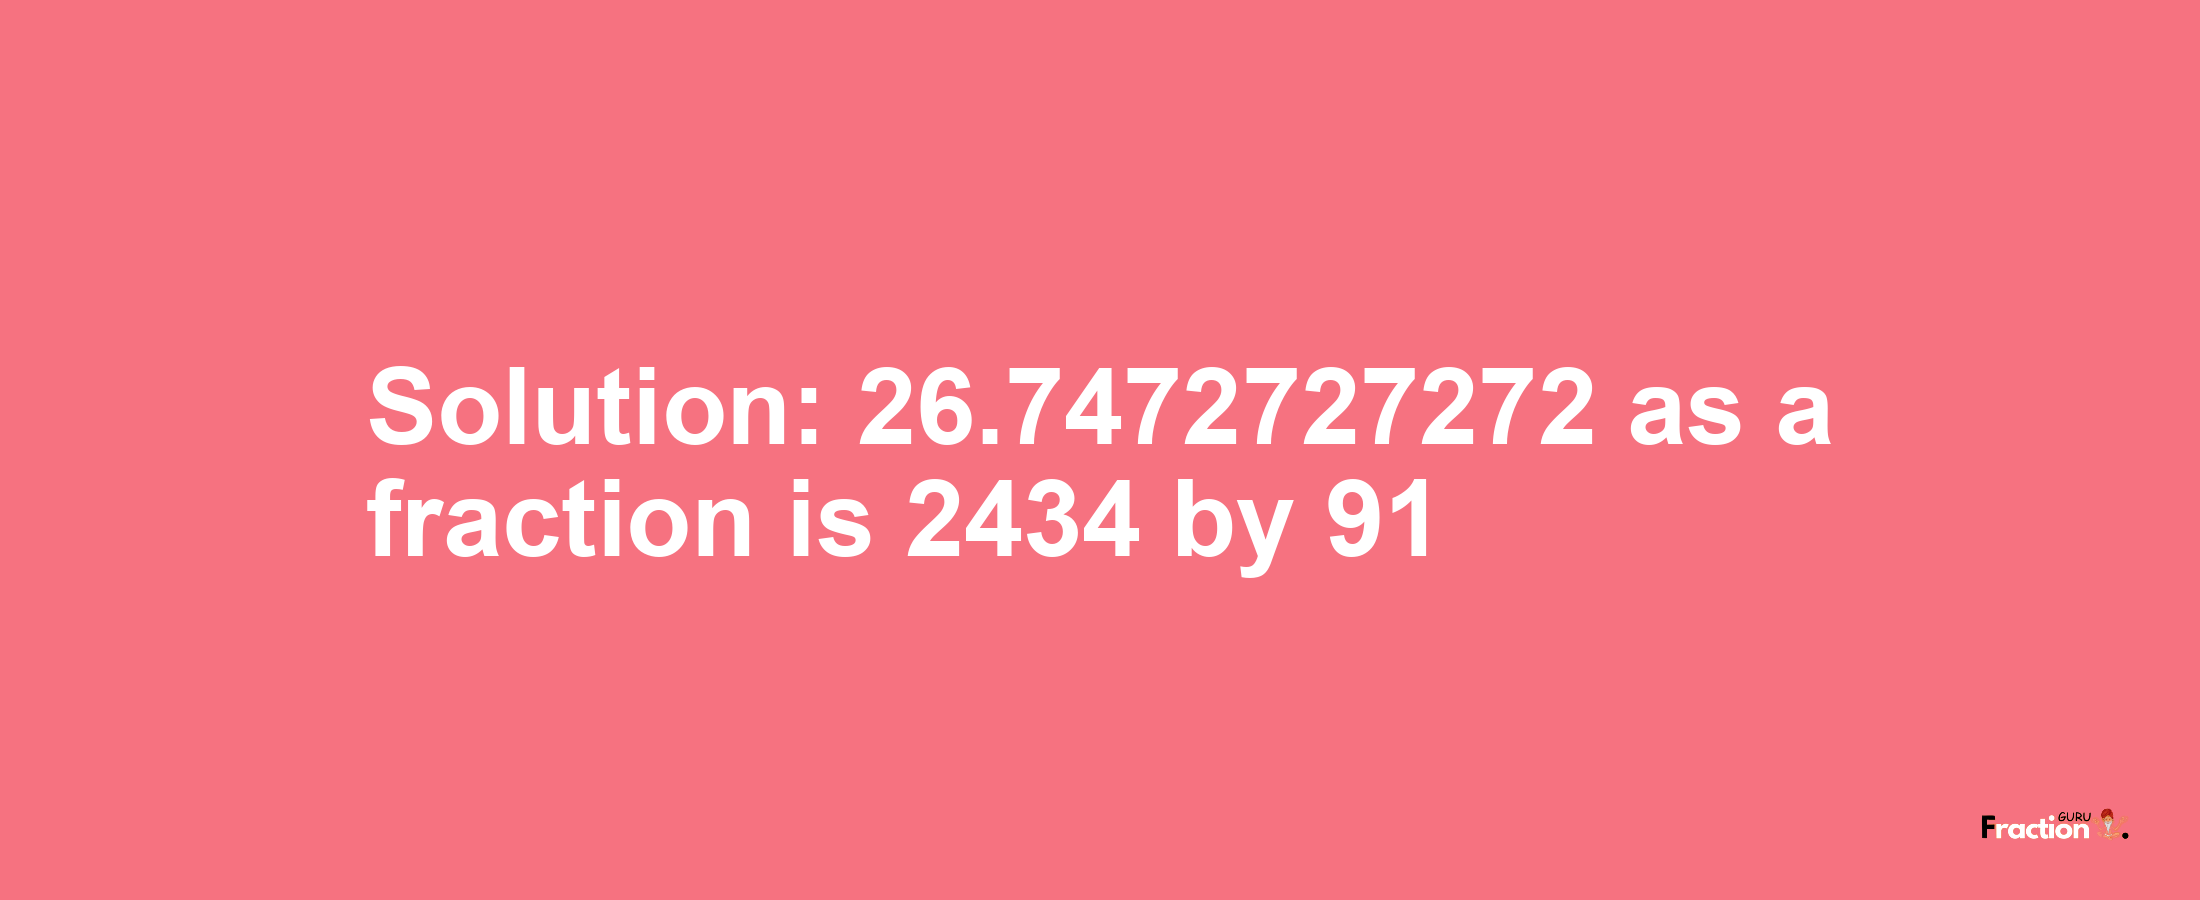 Solution:26.7472727272 as a fraction is 2434/91